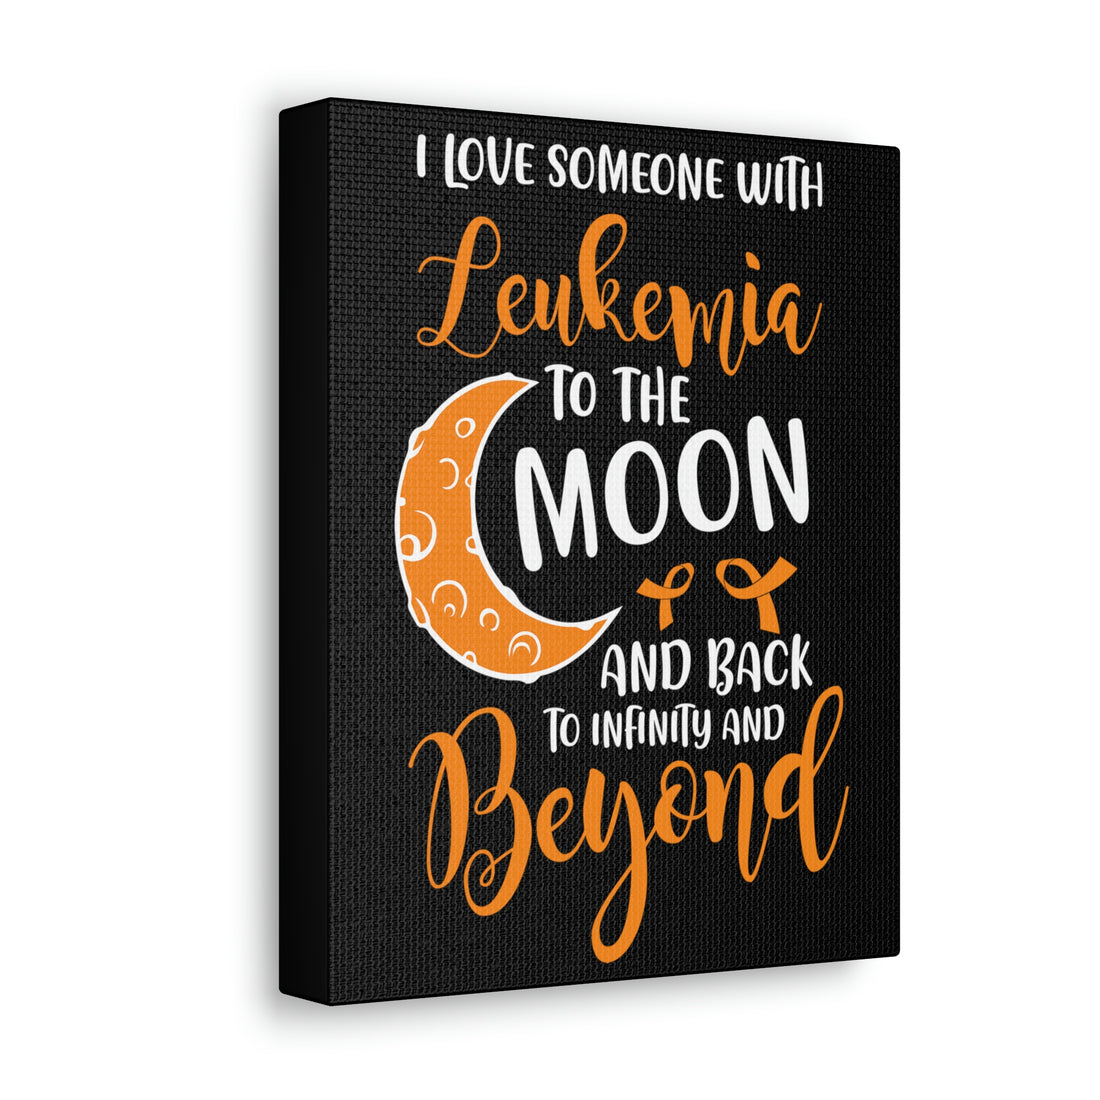 I Love Someone With Leukemia To The Moon And Back - Canvass Print